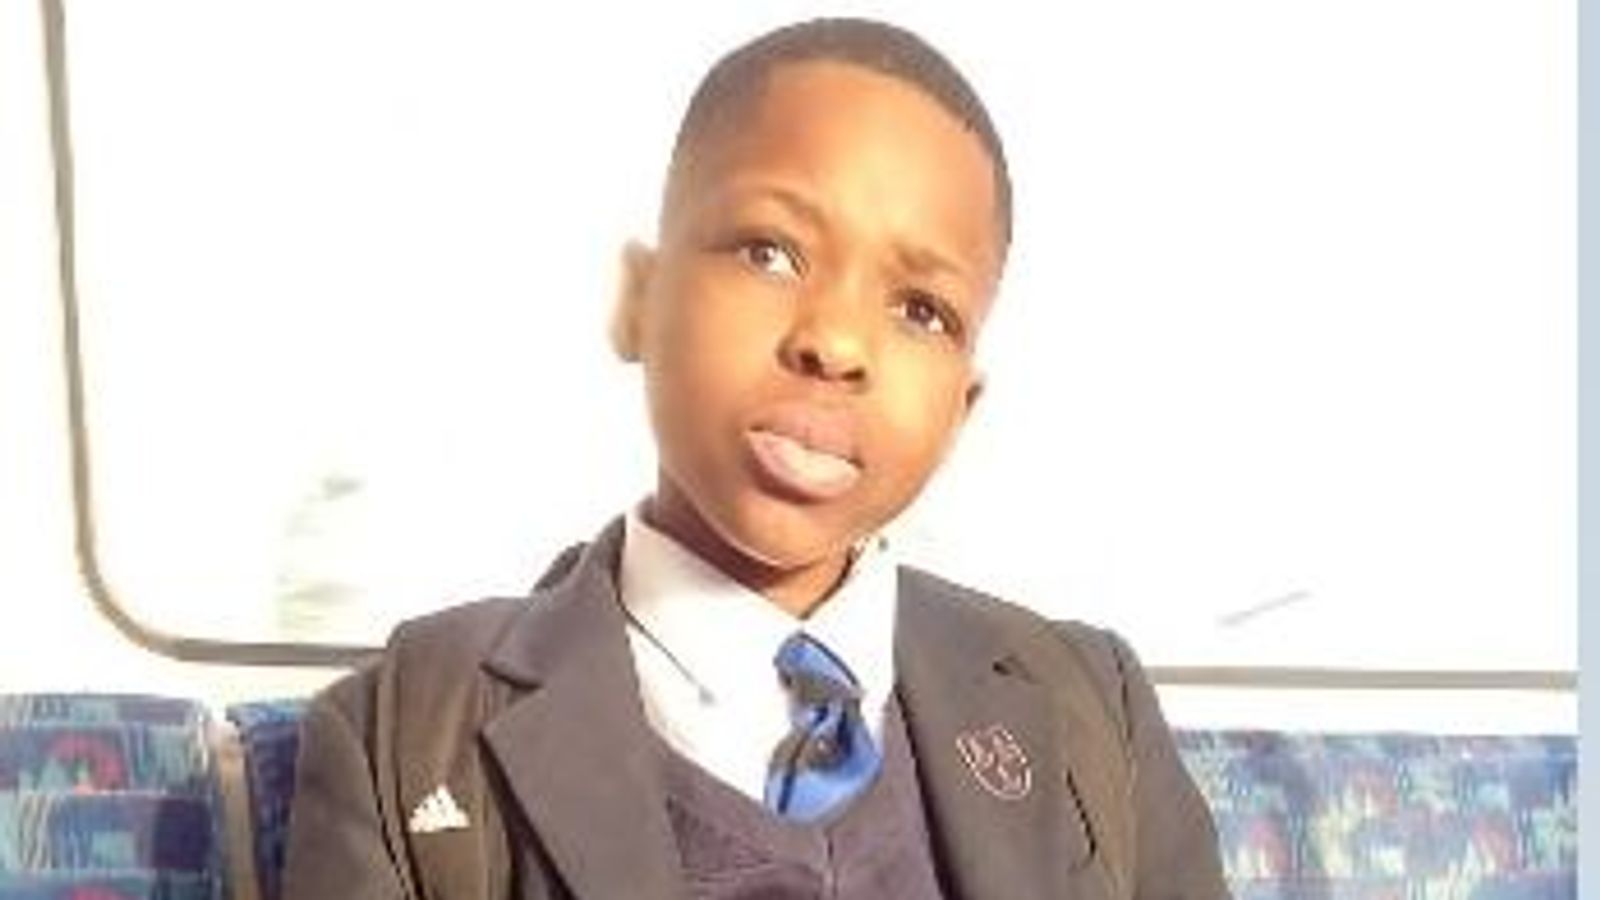 Hainault stabbings: Schoolboy killed in sword attack named as Daniel Anjorin – as family pays tribute to ‘wonderful child’ | Breaking News News